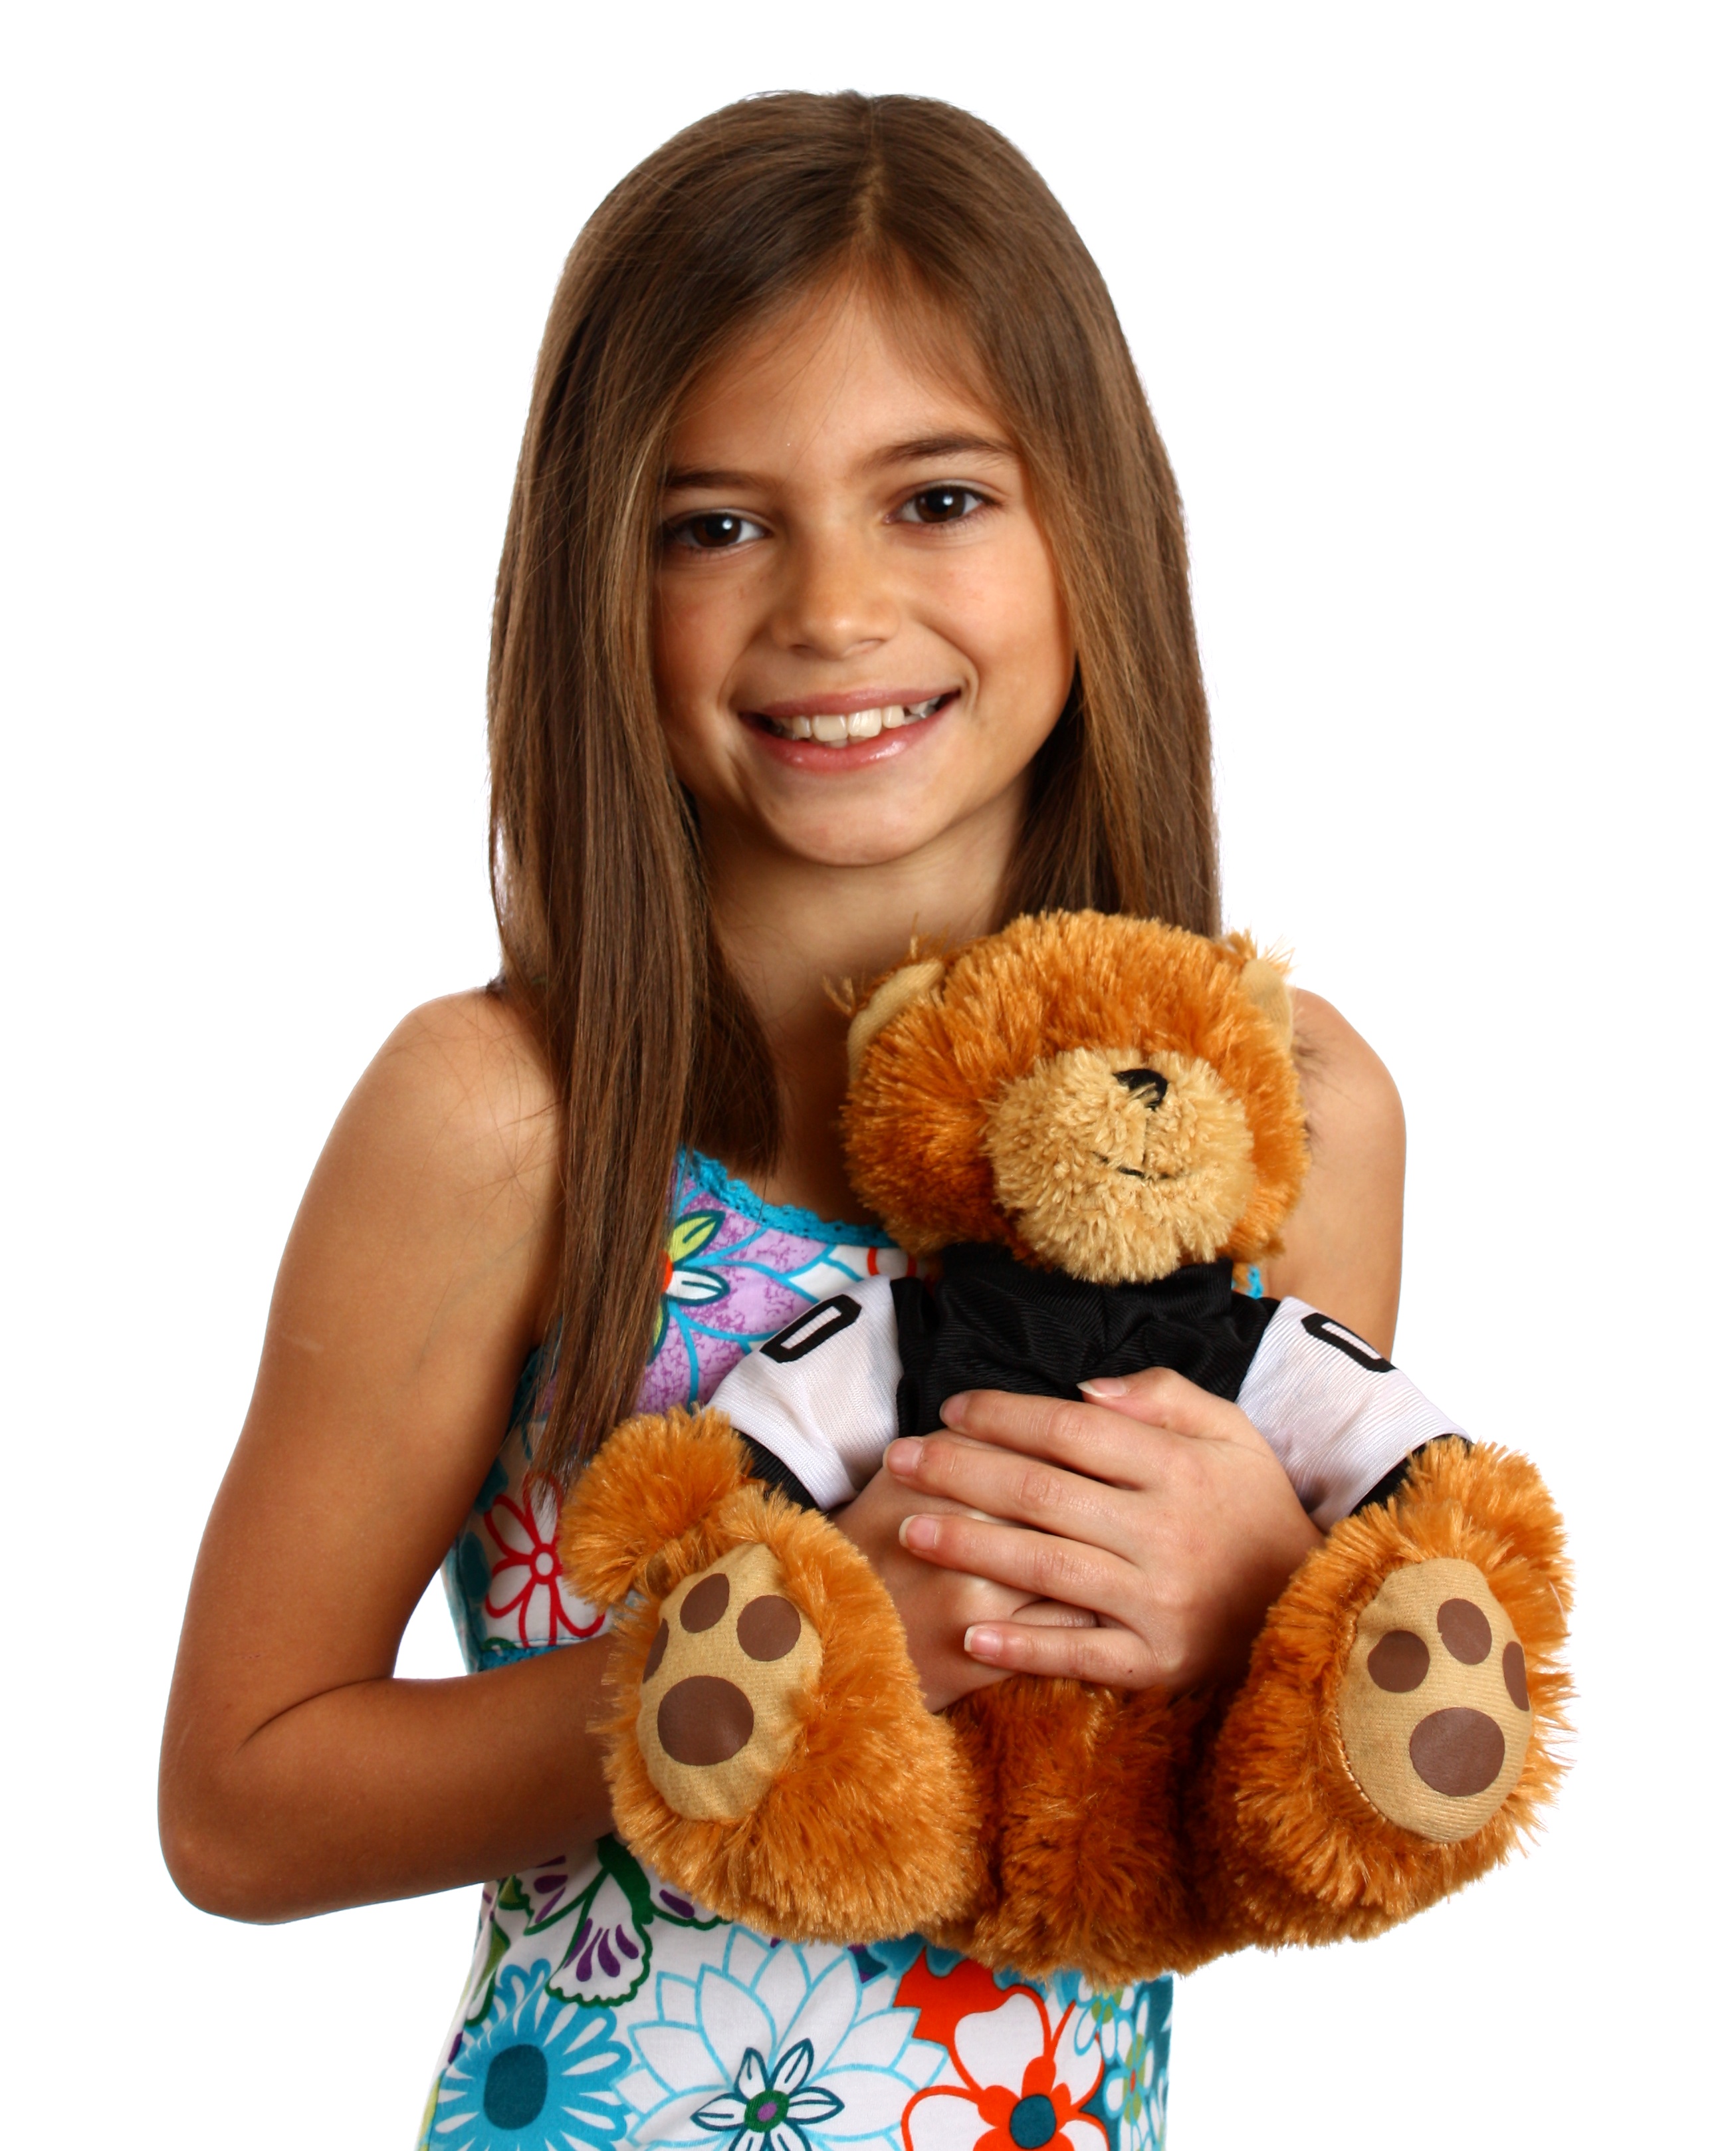 A pretty young girl holding a teddy bear photo